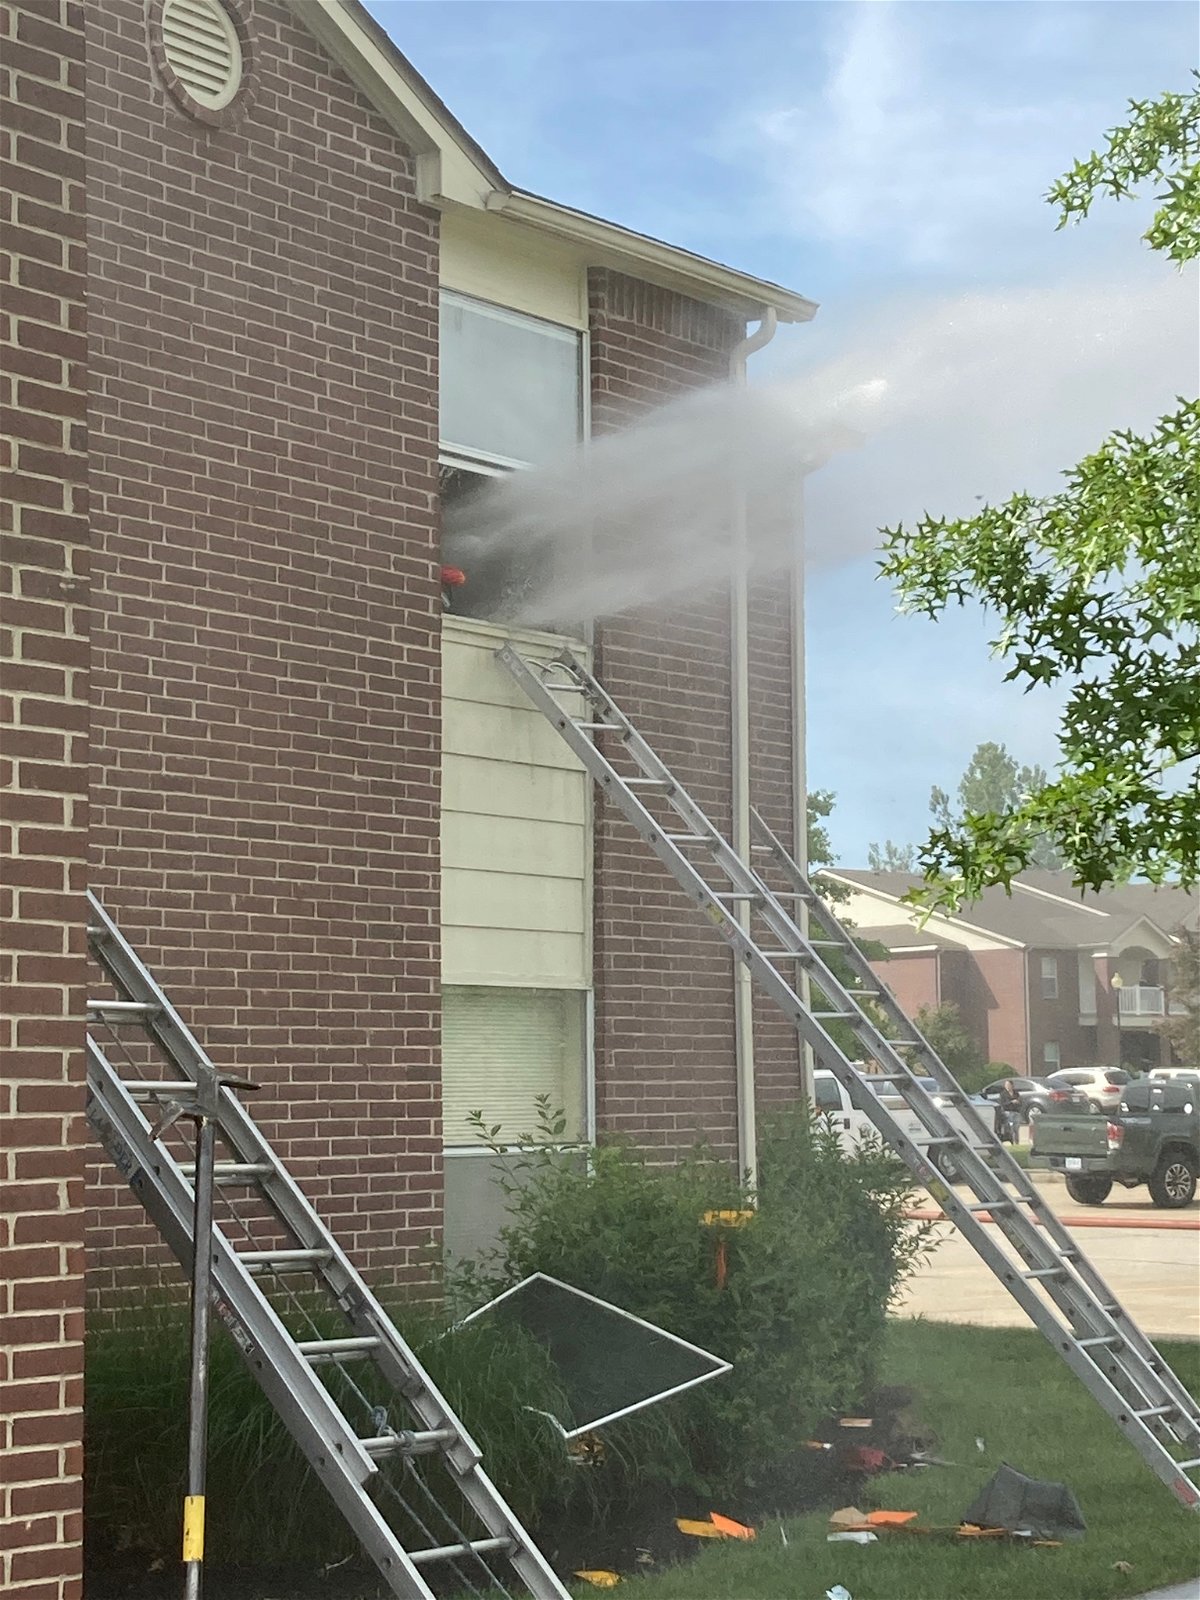 The Columbia Fire Department responded to a structure fire on Sunday afternoon with reports of animals trapped inside.